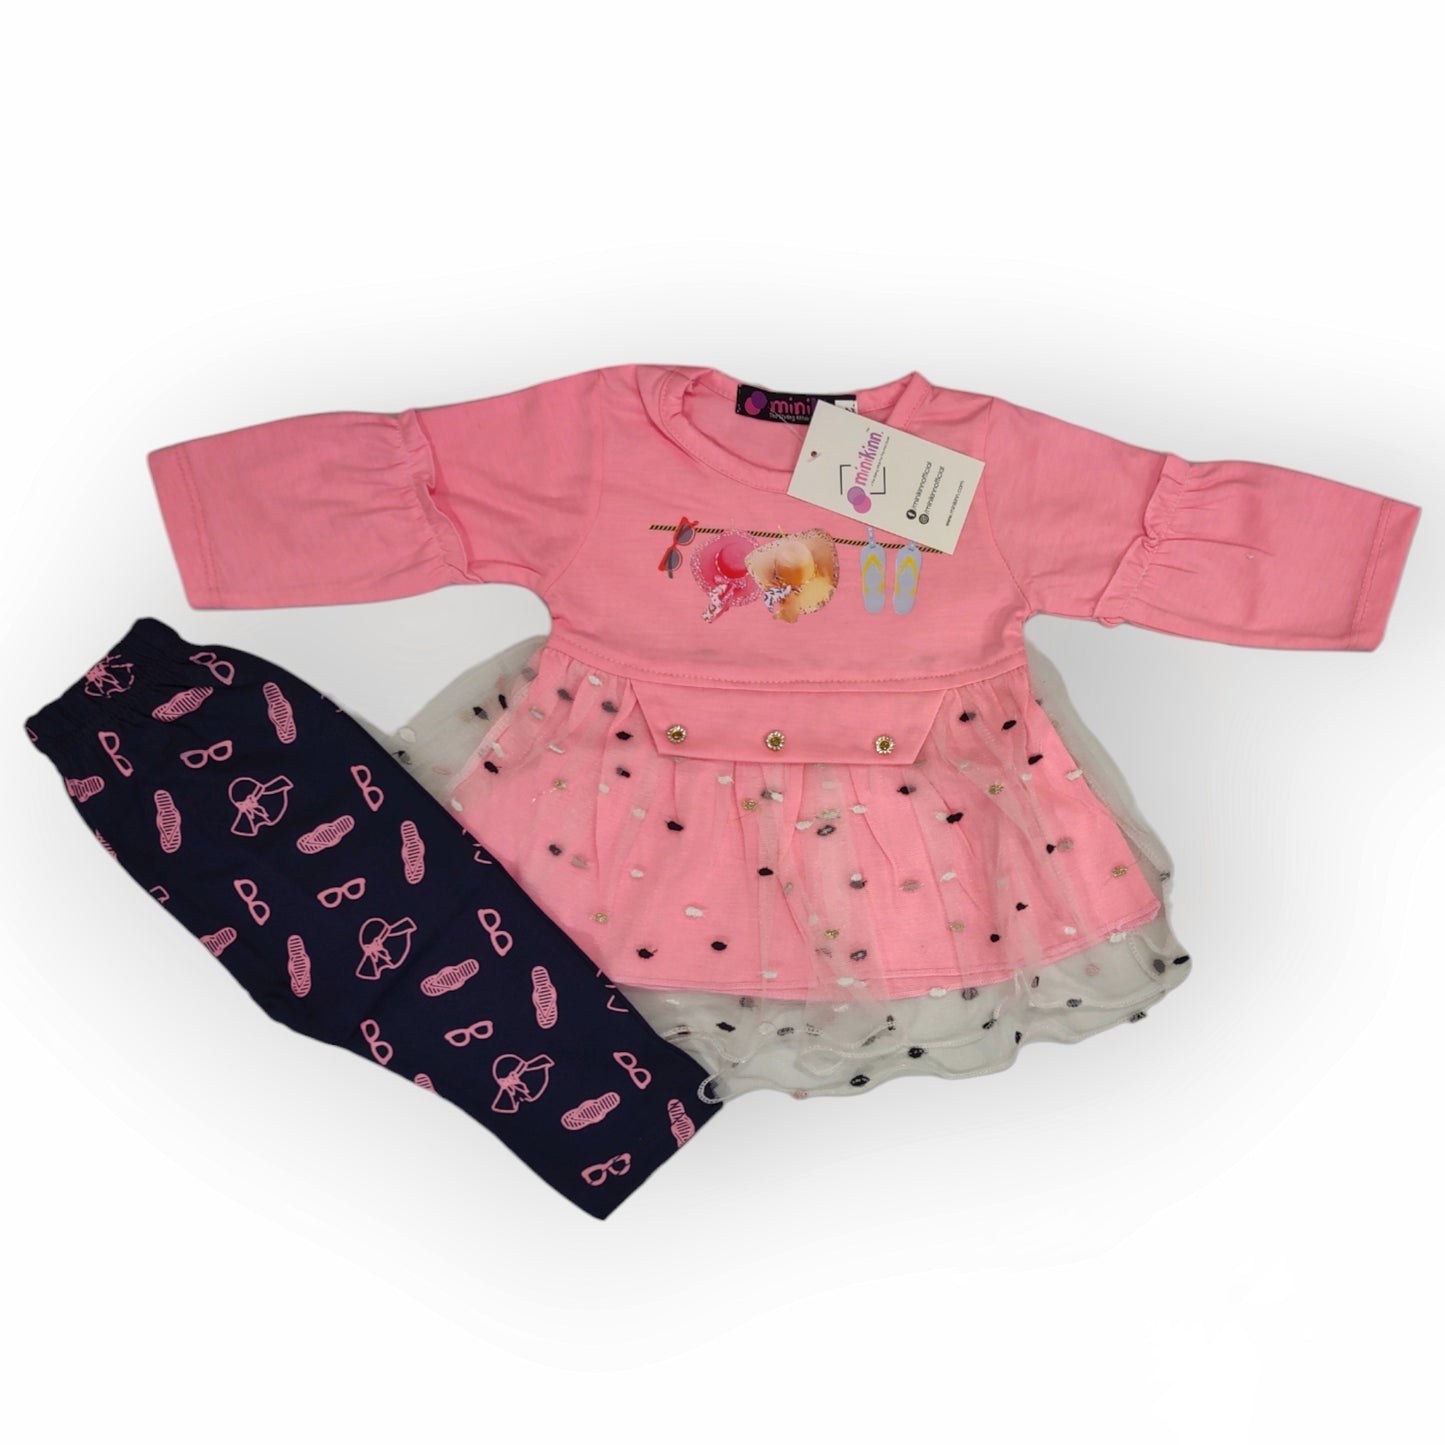 Girls Imported Net / Fine Jersey Frock with Trousers - 2 Piece Set (Gfl-V5.1-2004)